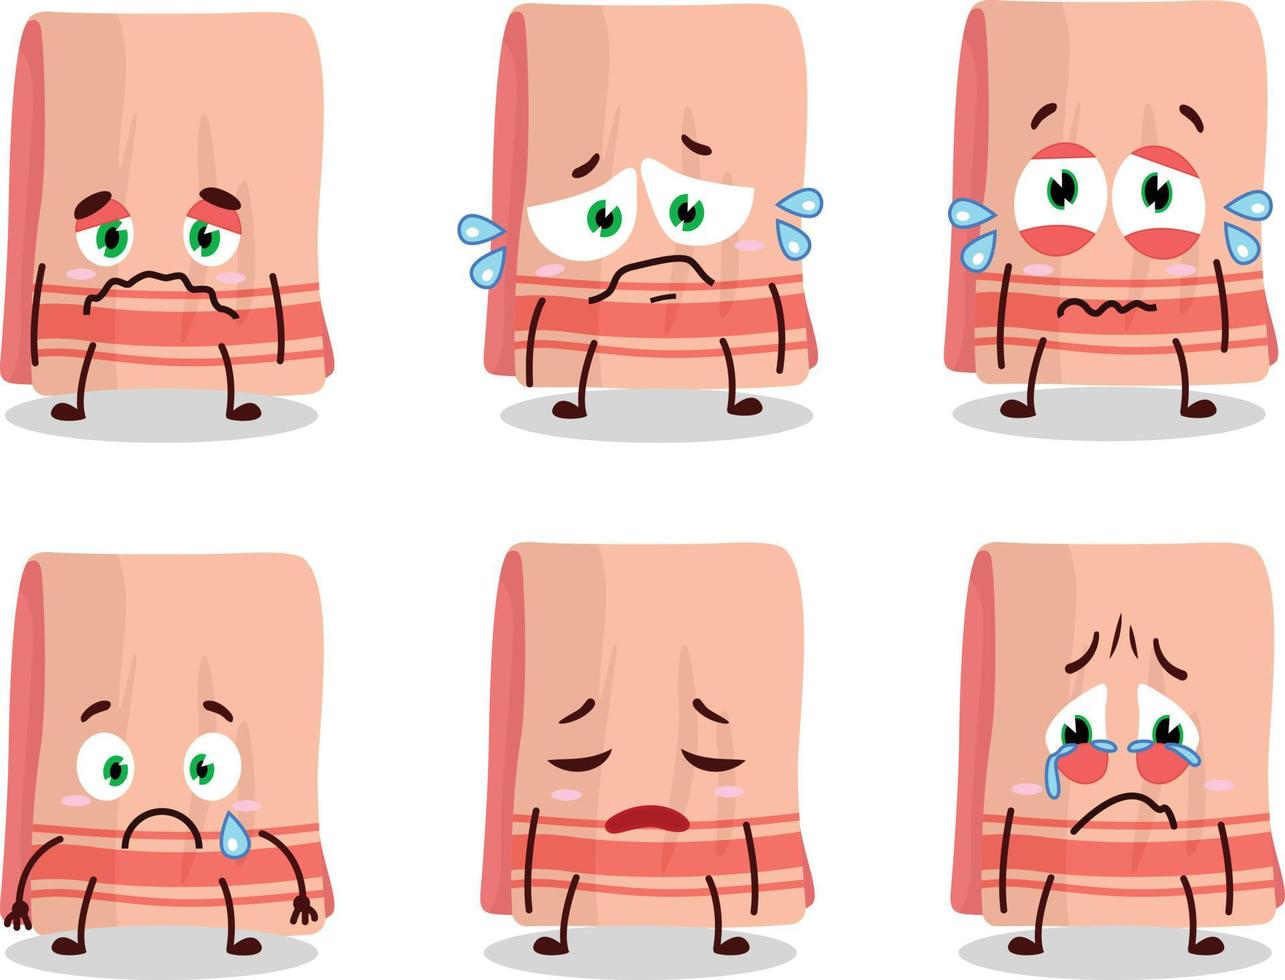 Towel cartoon in character with sad expression vector